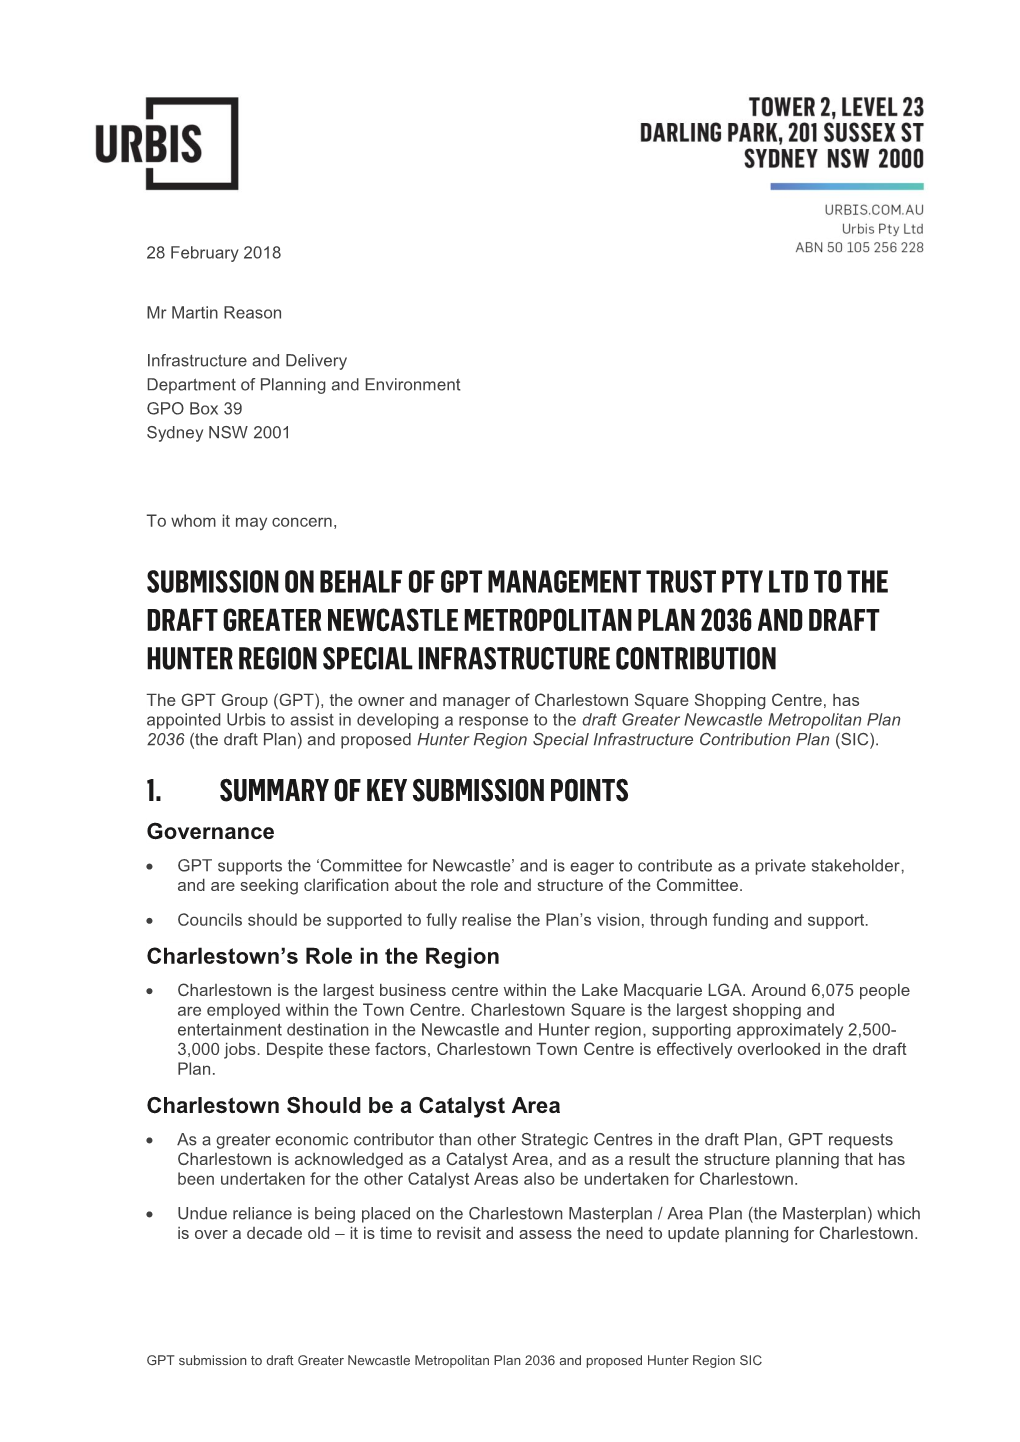 Submission on Behalf of Gpt Management Trust Pty Ltd